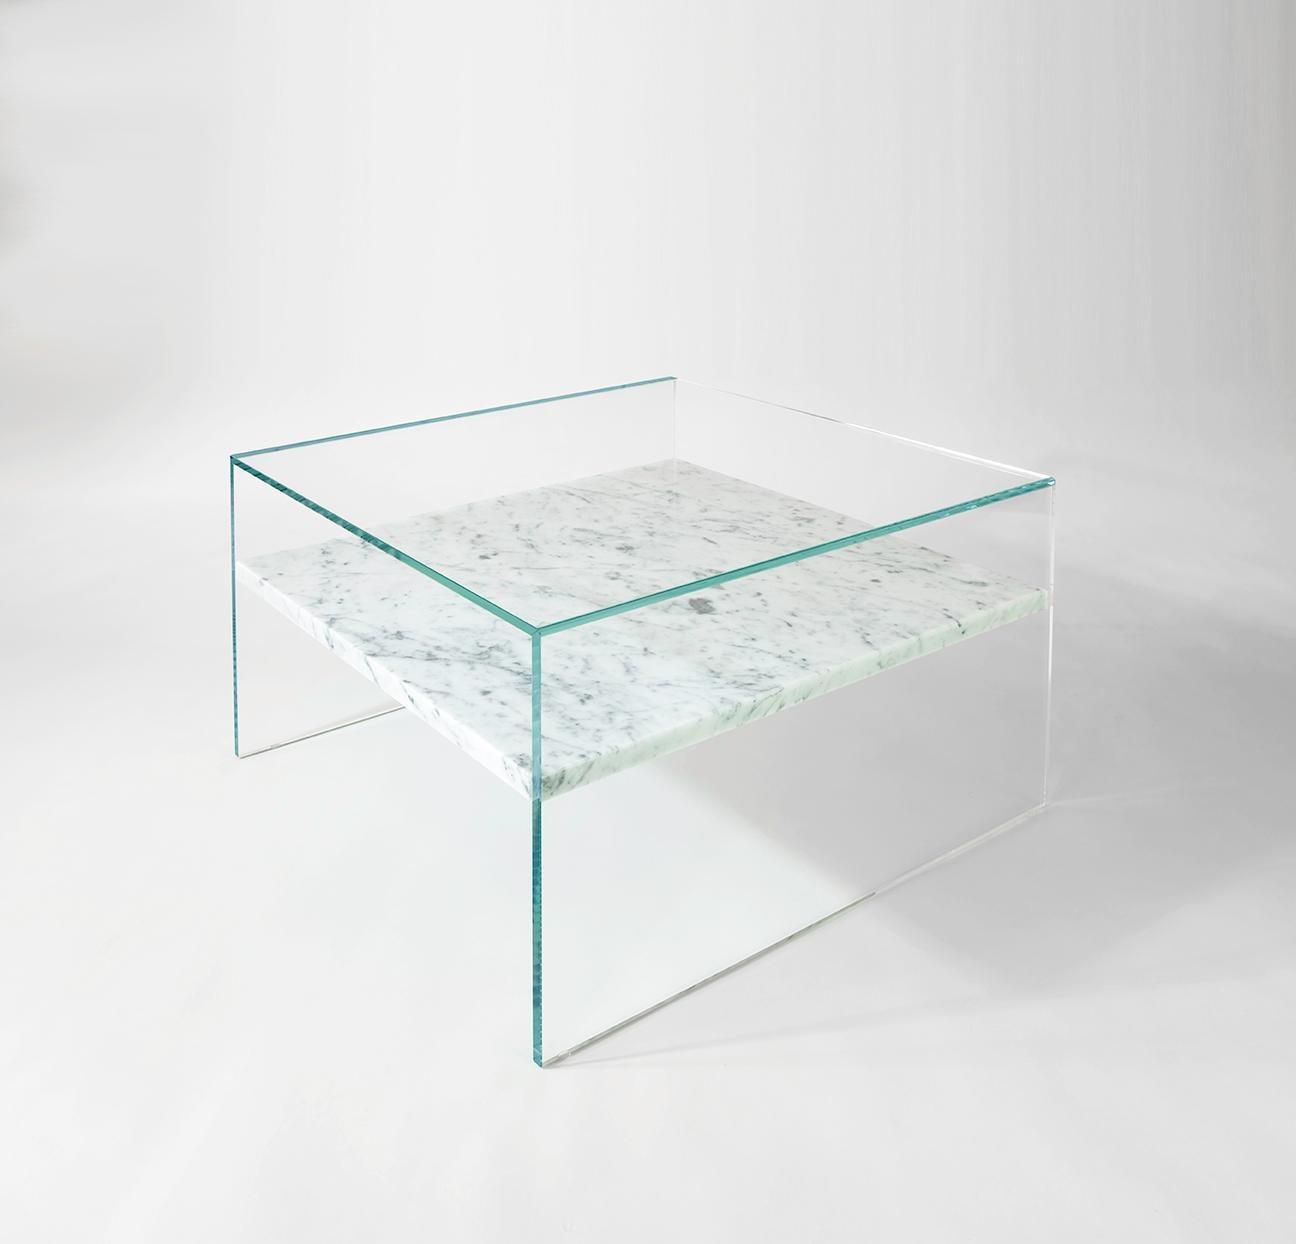 A side table with floating marble shelf that is as functional as it is beautiful. The glass enclosure allows for items to be displayed on both surfaces and is available in both ultra-clear and bronzed glass which allows for multiple combinations of